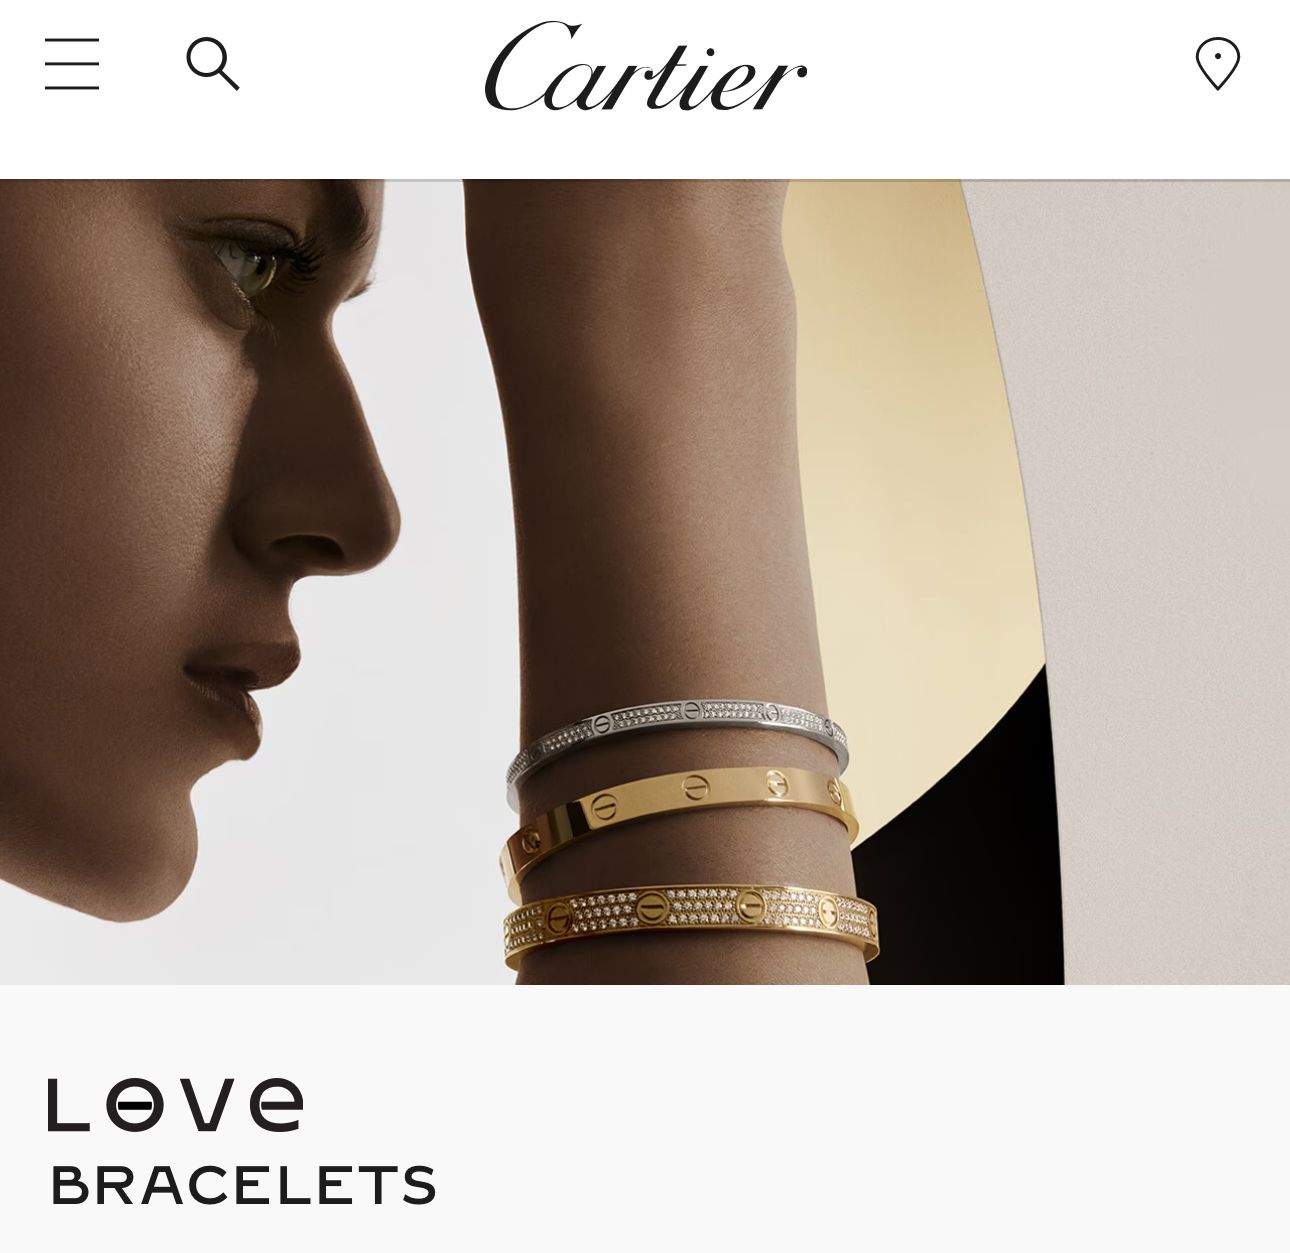 What's the sentiment on this for a male? : r/Cartier